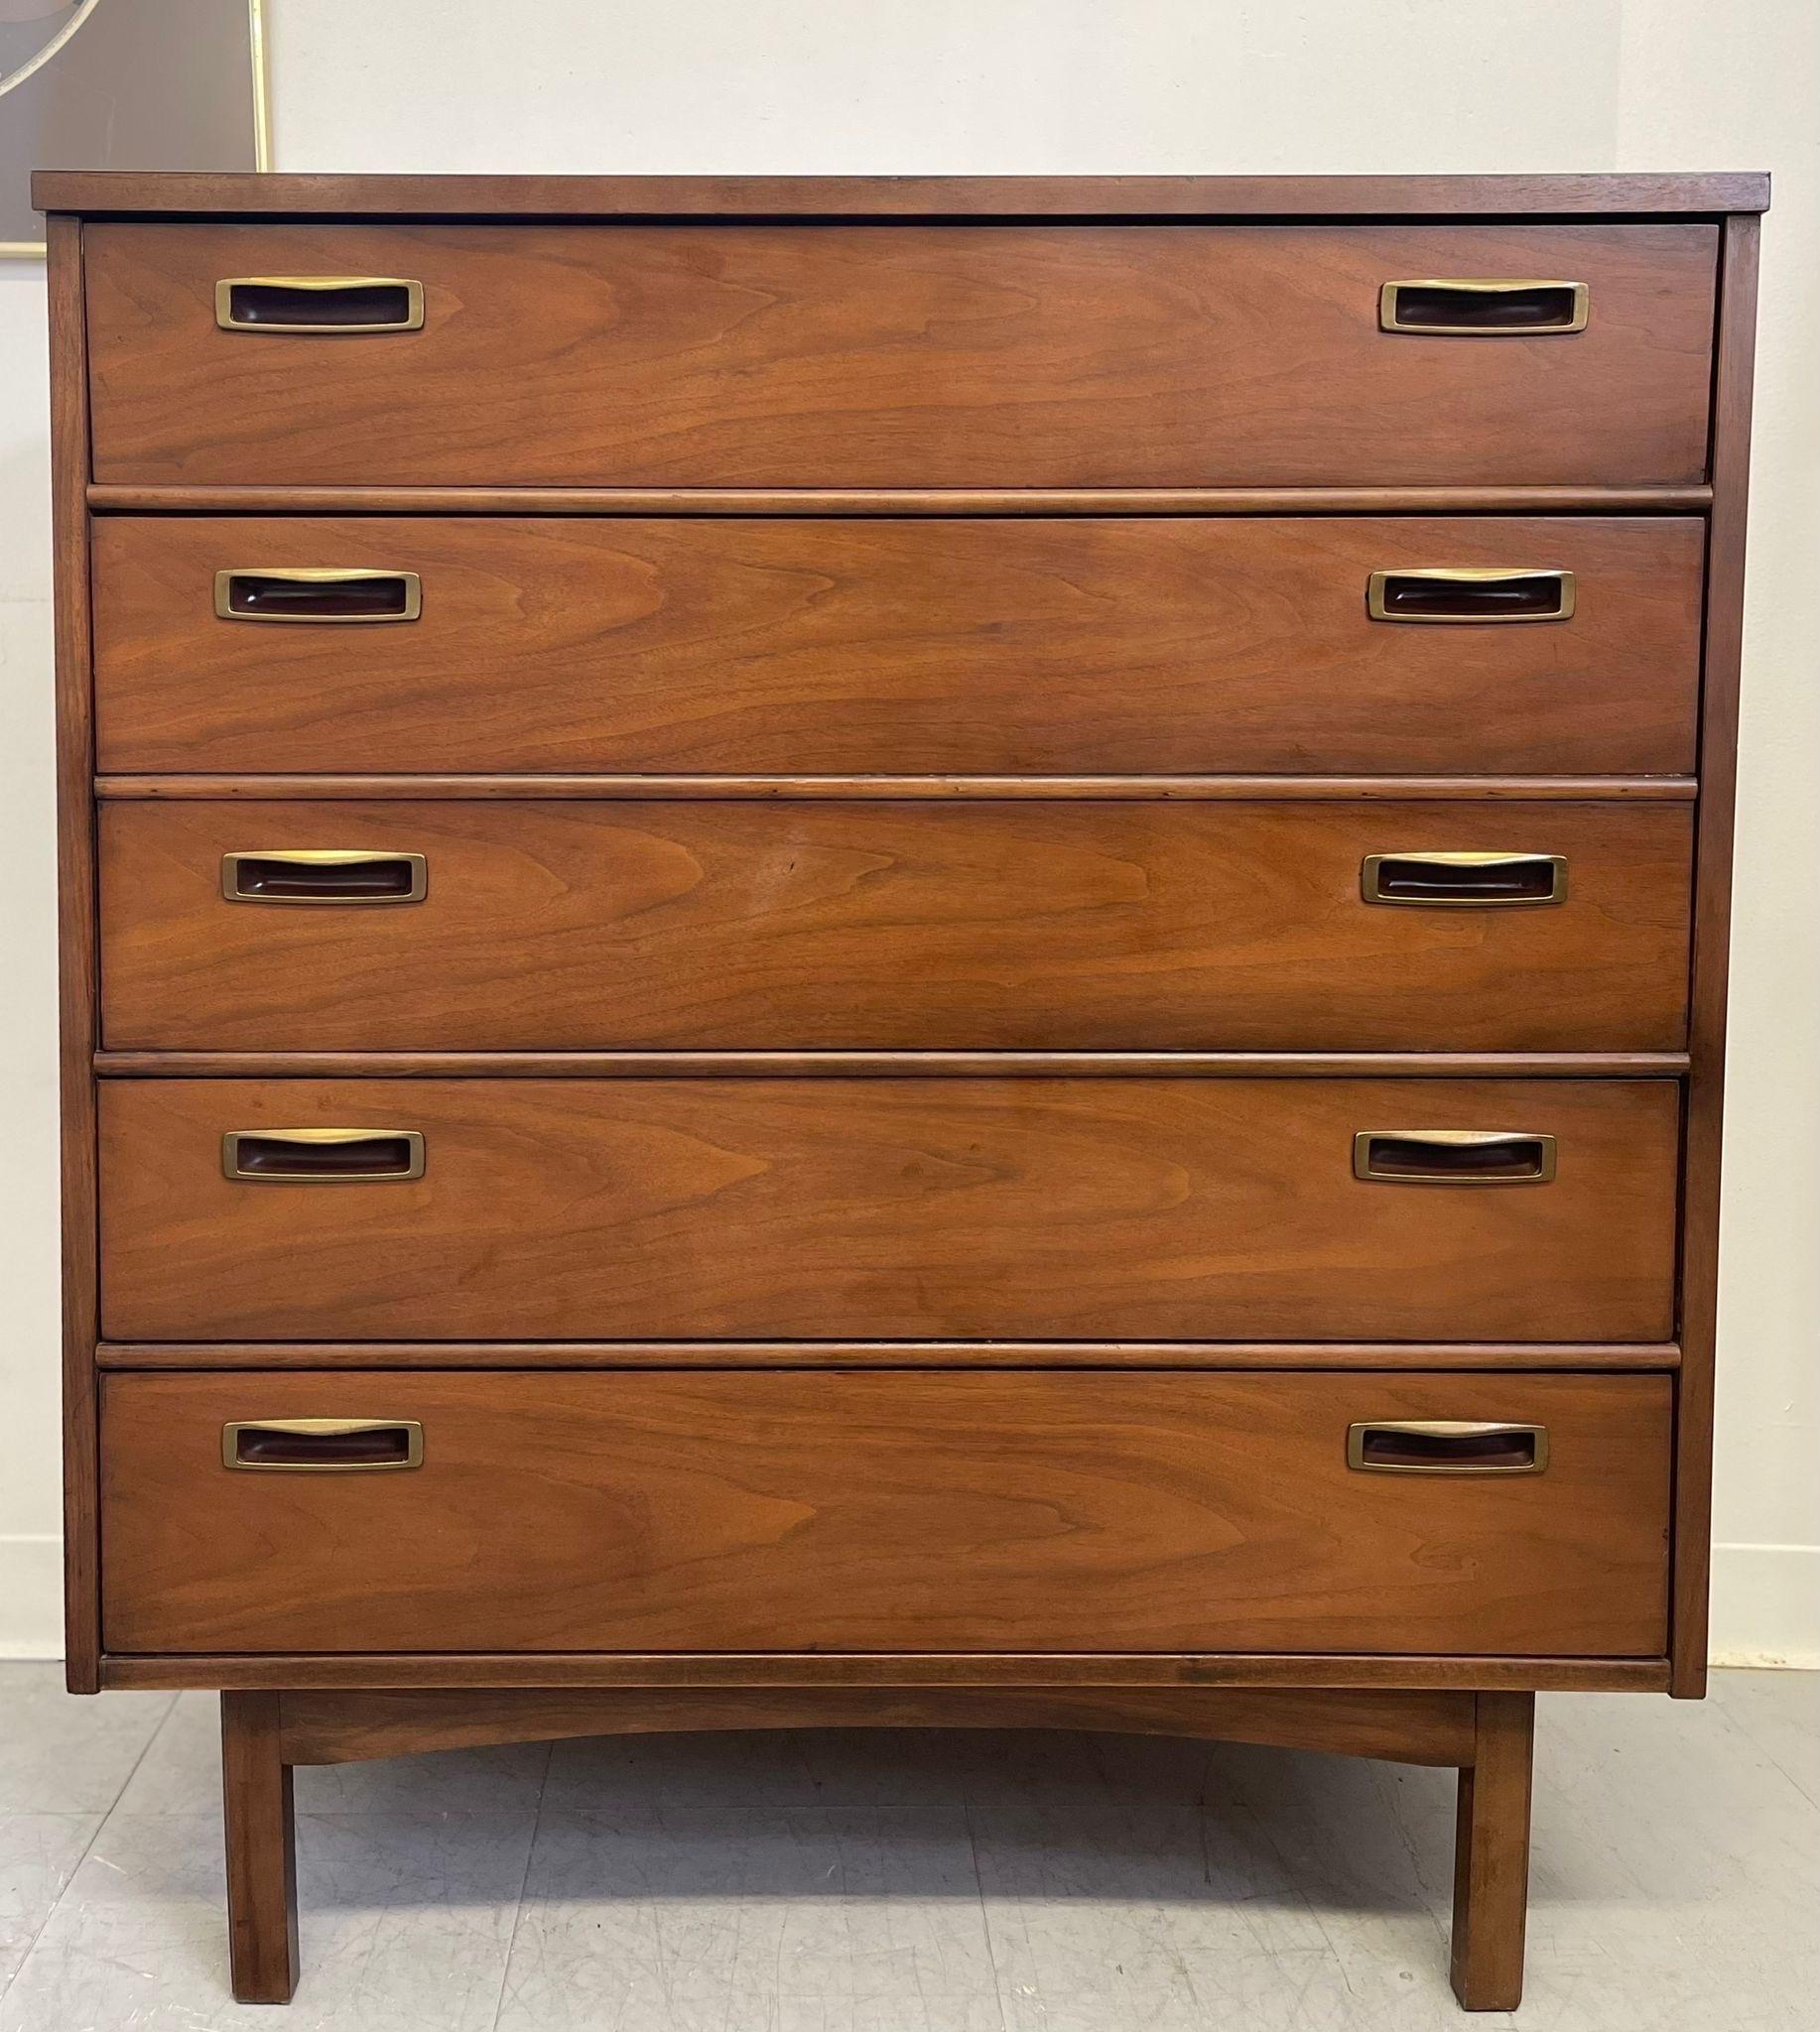 This Dresser has a Formica Top, with original brass toned handles. Tapered legs and dovetailed drawers, Classic mid Century design. The 2nd drawer from the top is a double drawer. Vintage Condition Consistent with Age as Pictured.

Dimensions. 38 W